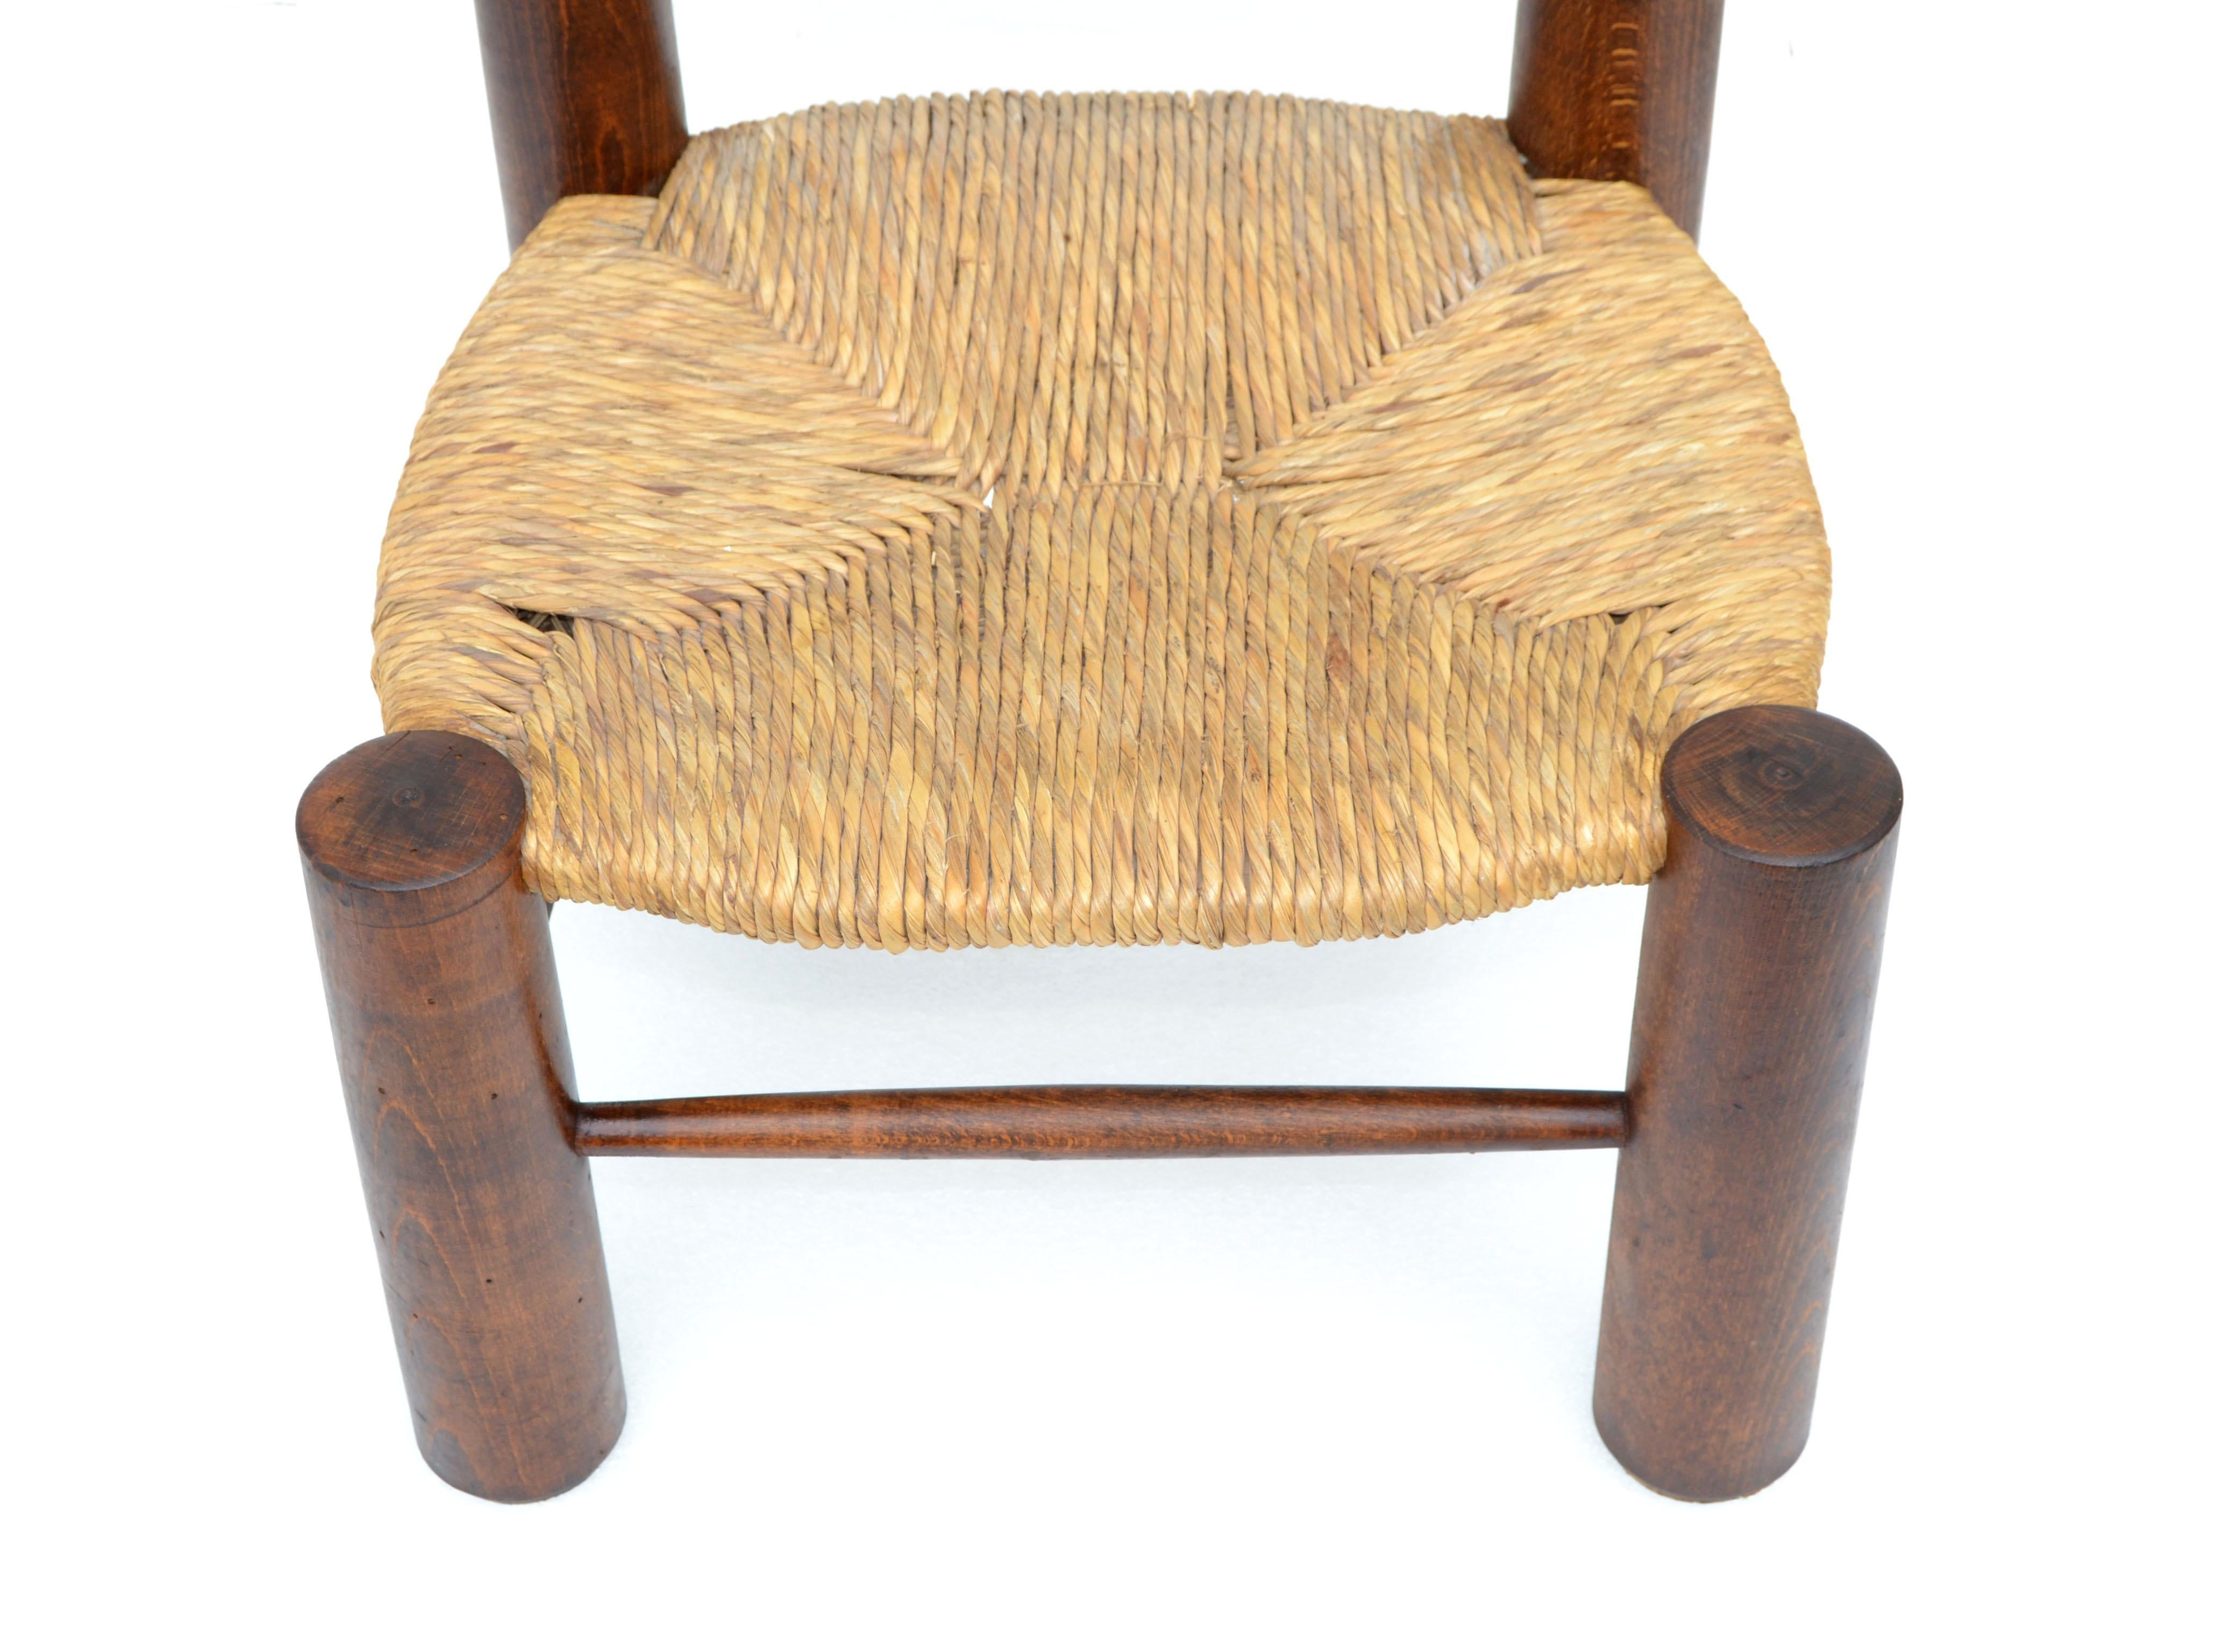 Charlotte Perriand Style Turned Wood Kid's Chair Woven Rush Seat France 1960 In Good Condition For Sale In Miami, FL